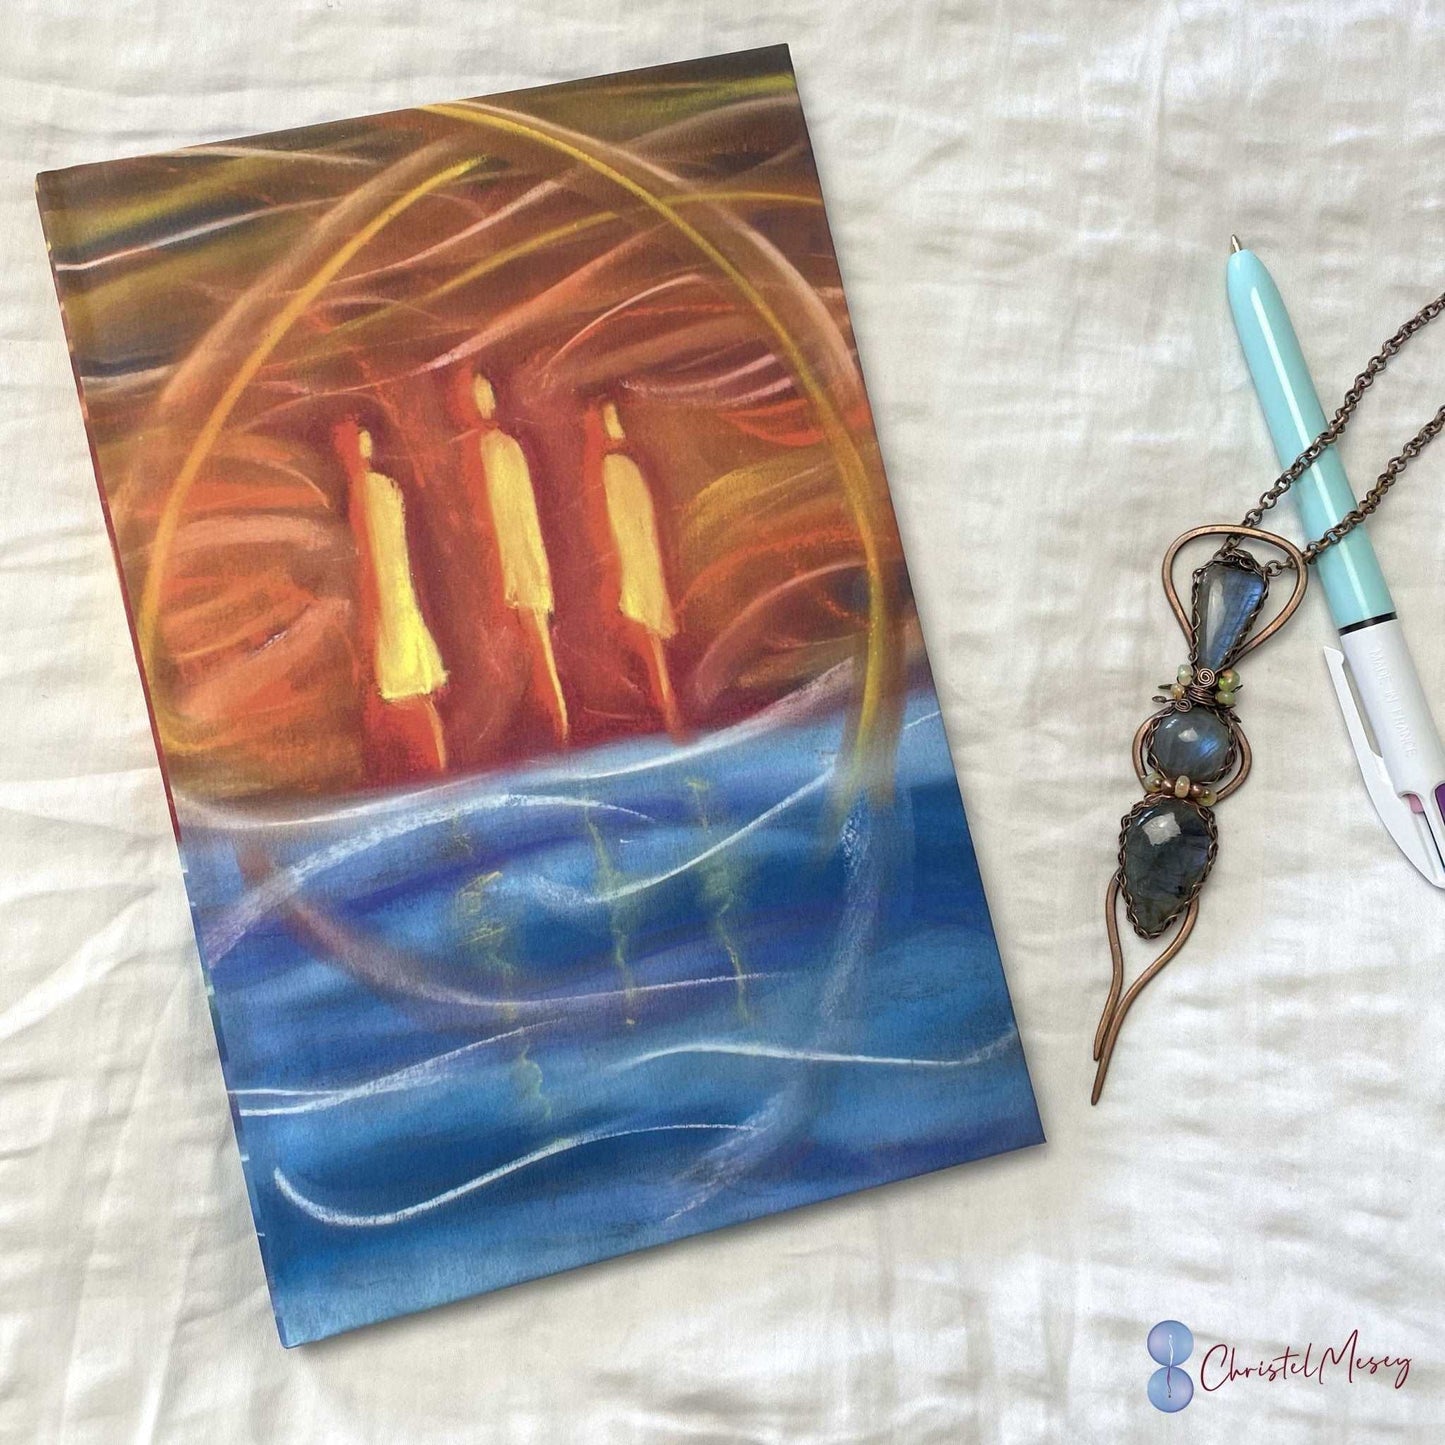 Fire and Water - Notebook - Hardcover & dotted pages - Christel Mesey Art